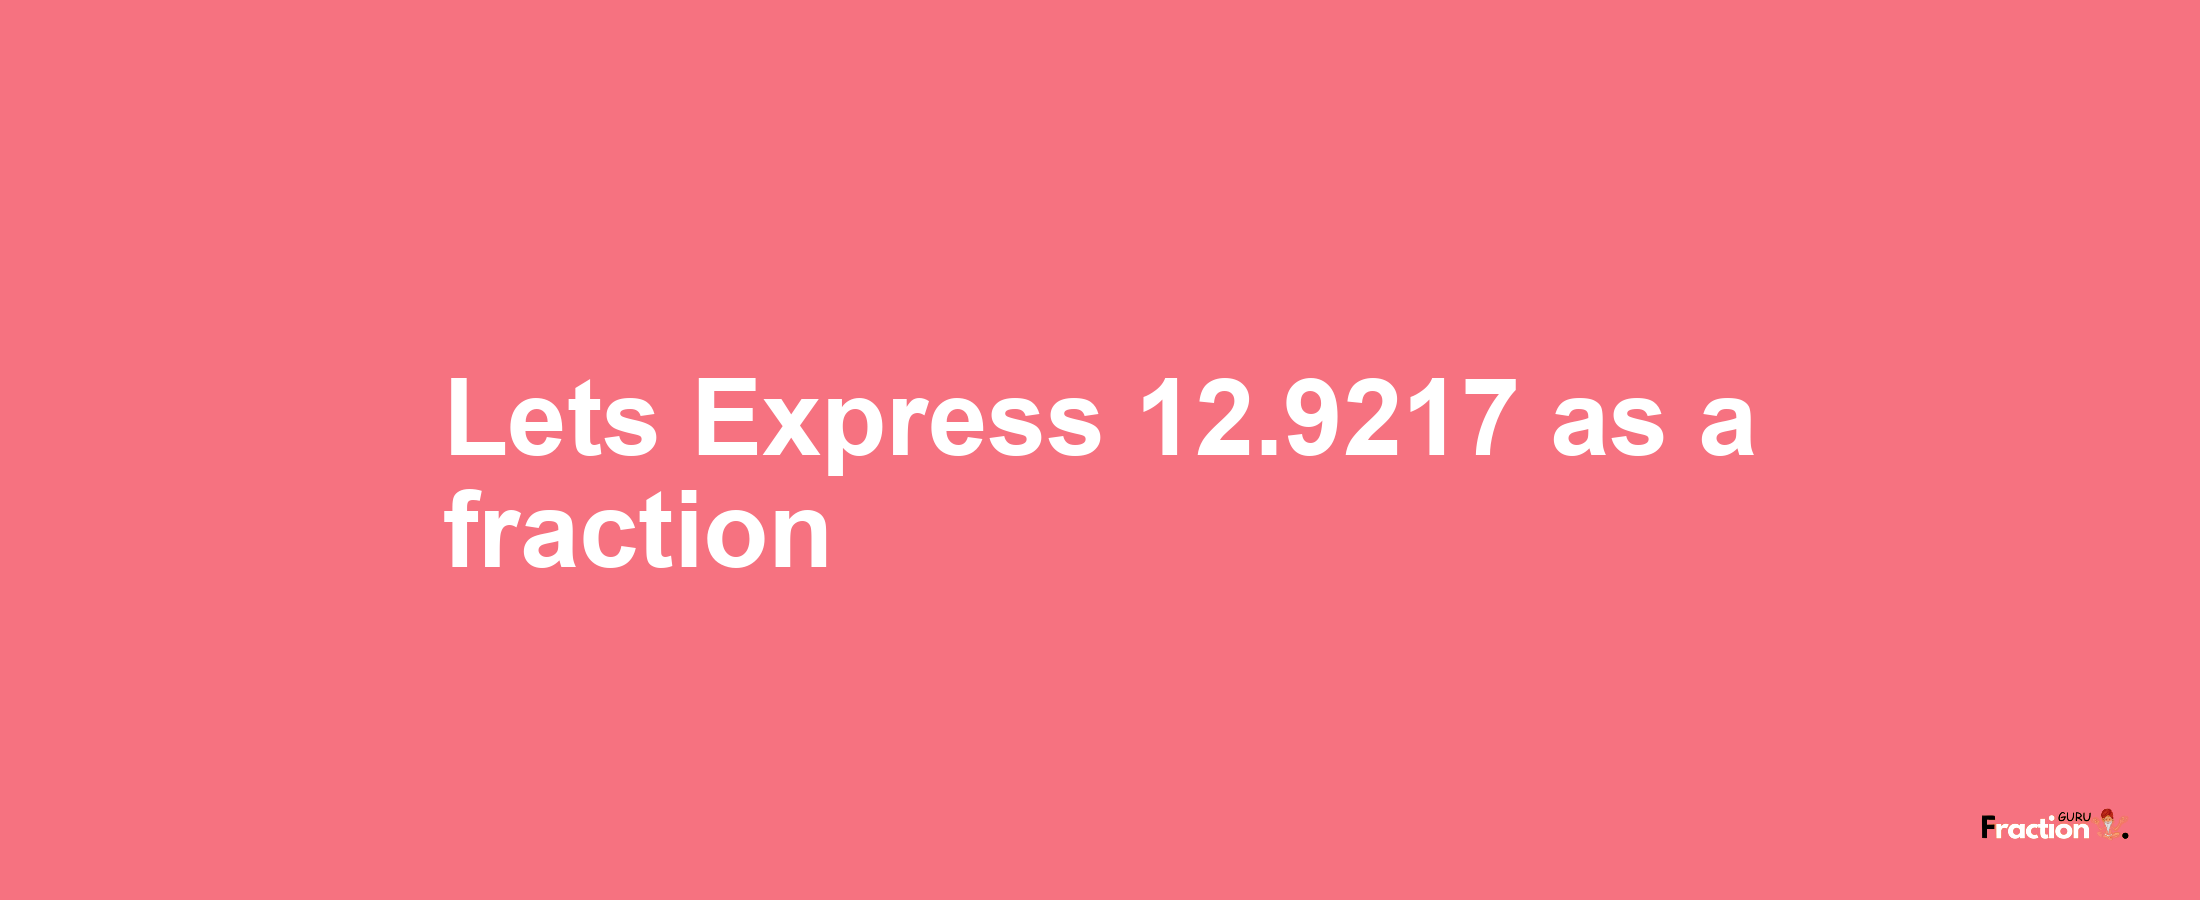 Lets Express 12.9217 as afraction